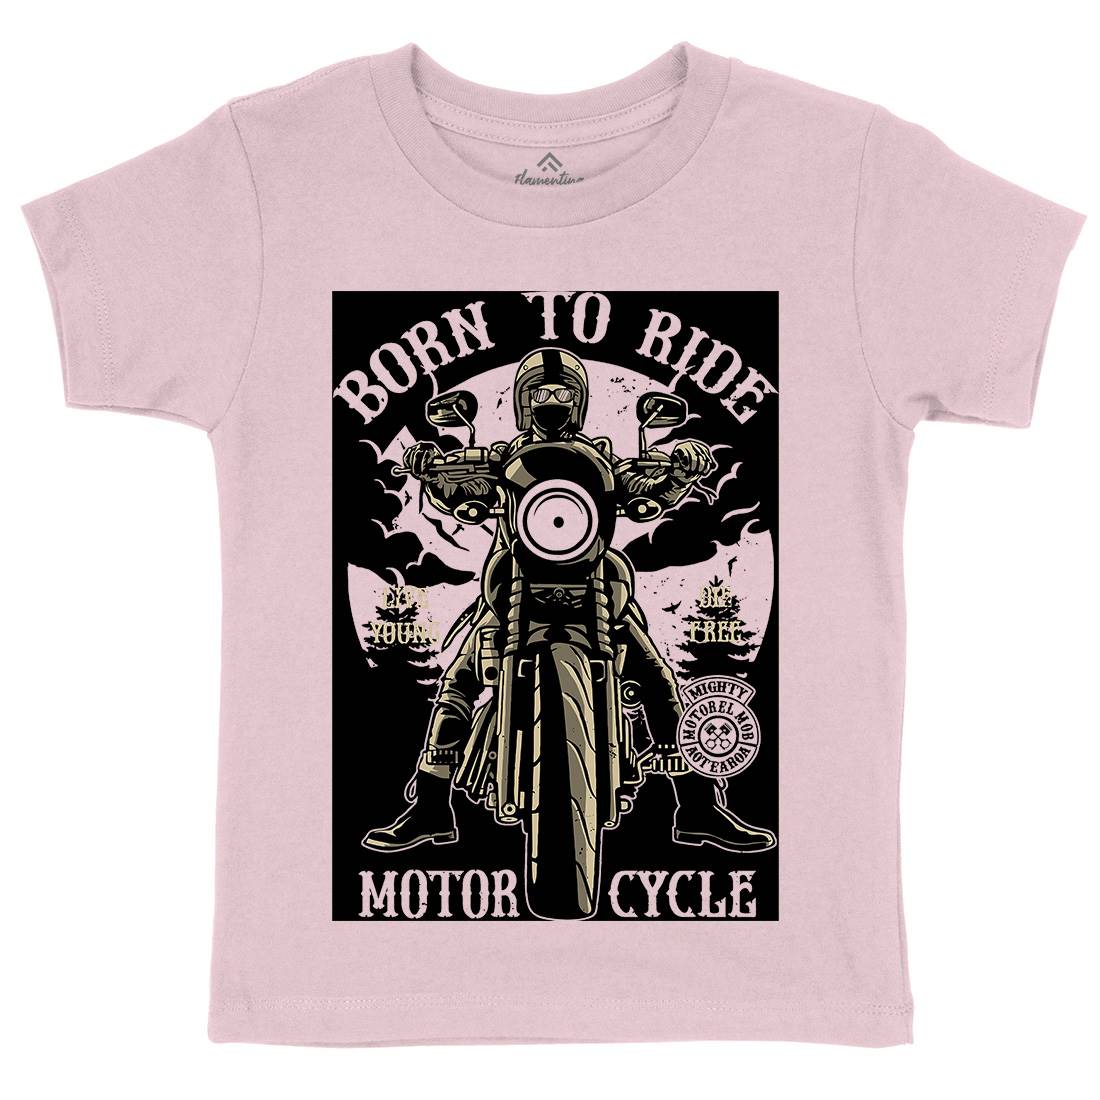 Born To Ride Kids Organic Crew Neck T-Shirt Motorcycles A512